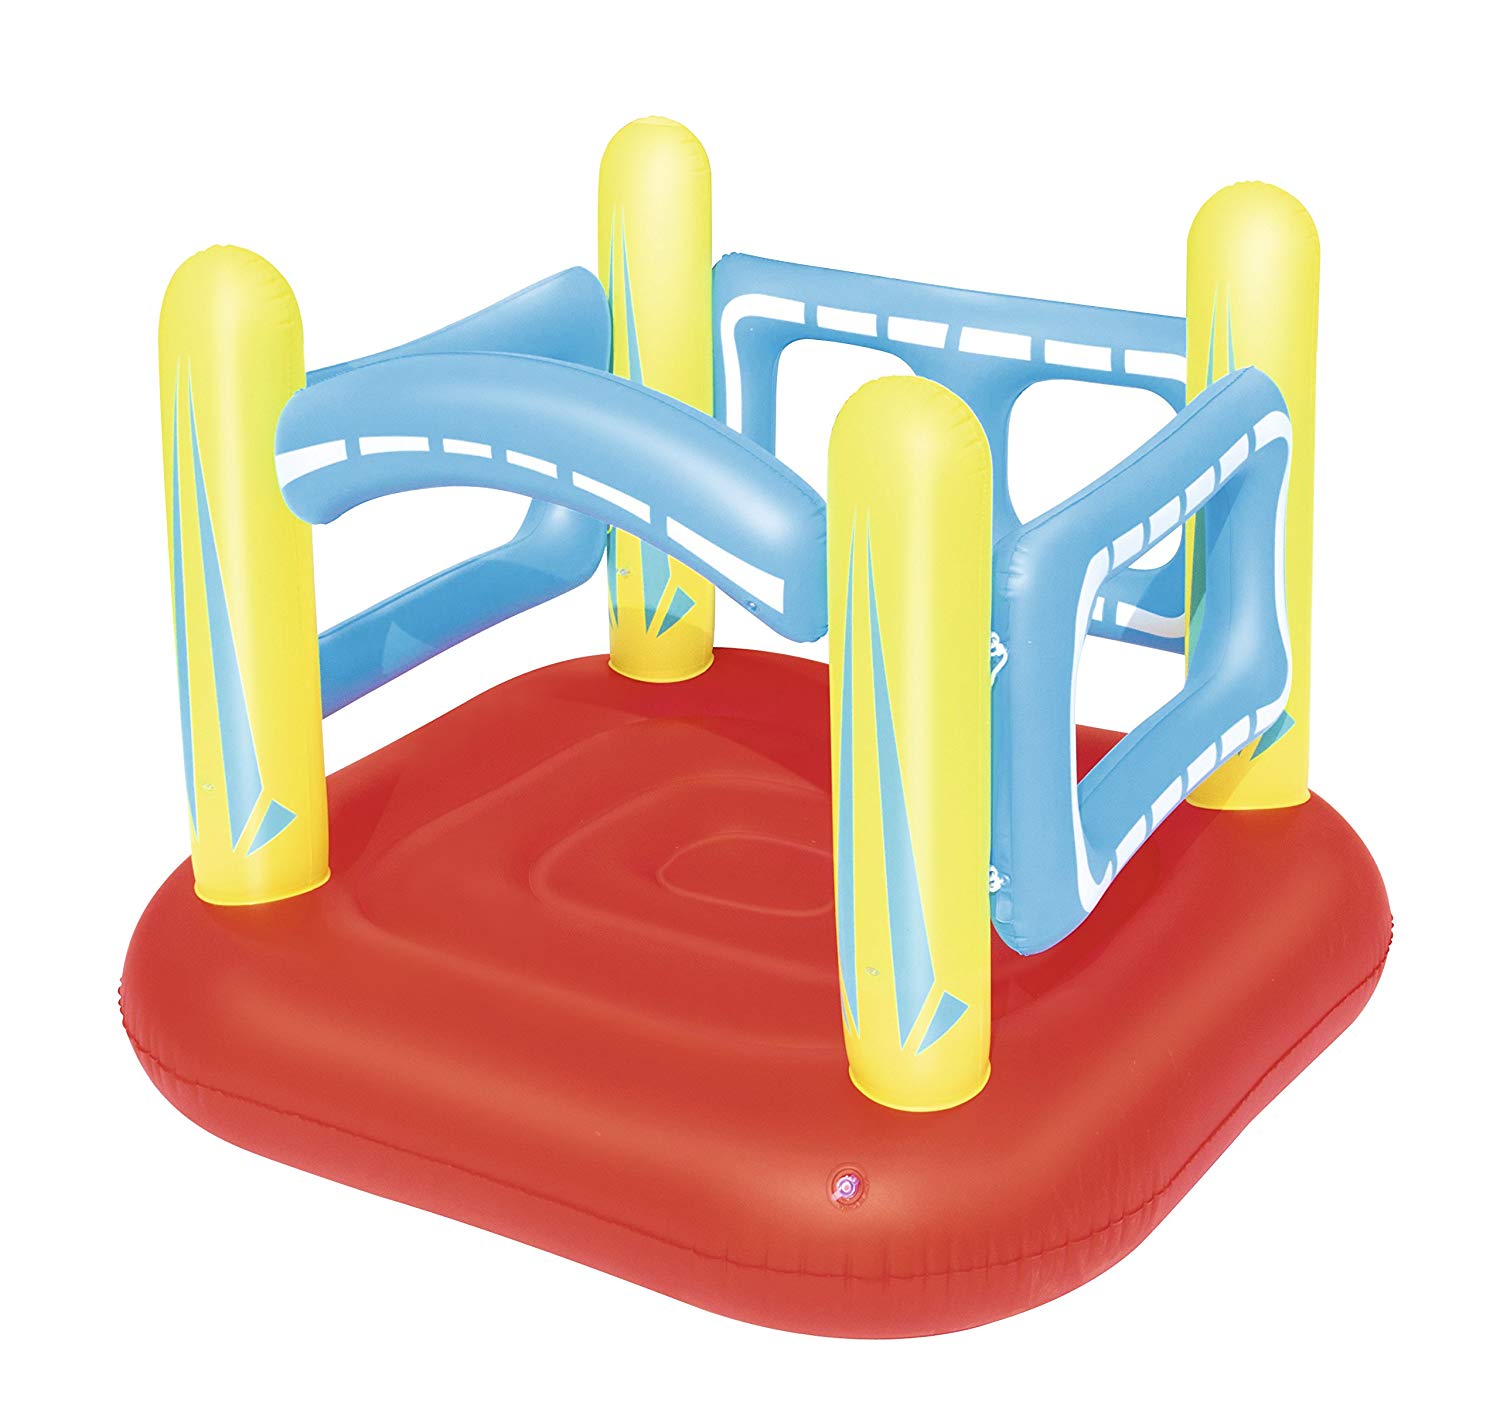 Up, In & Over Bouncestastic Bouncer (62" x 58" x 47"/1.57m x 1.47m x 1.19m)